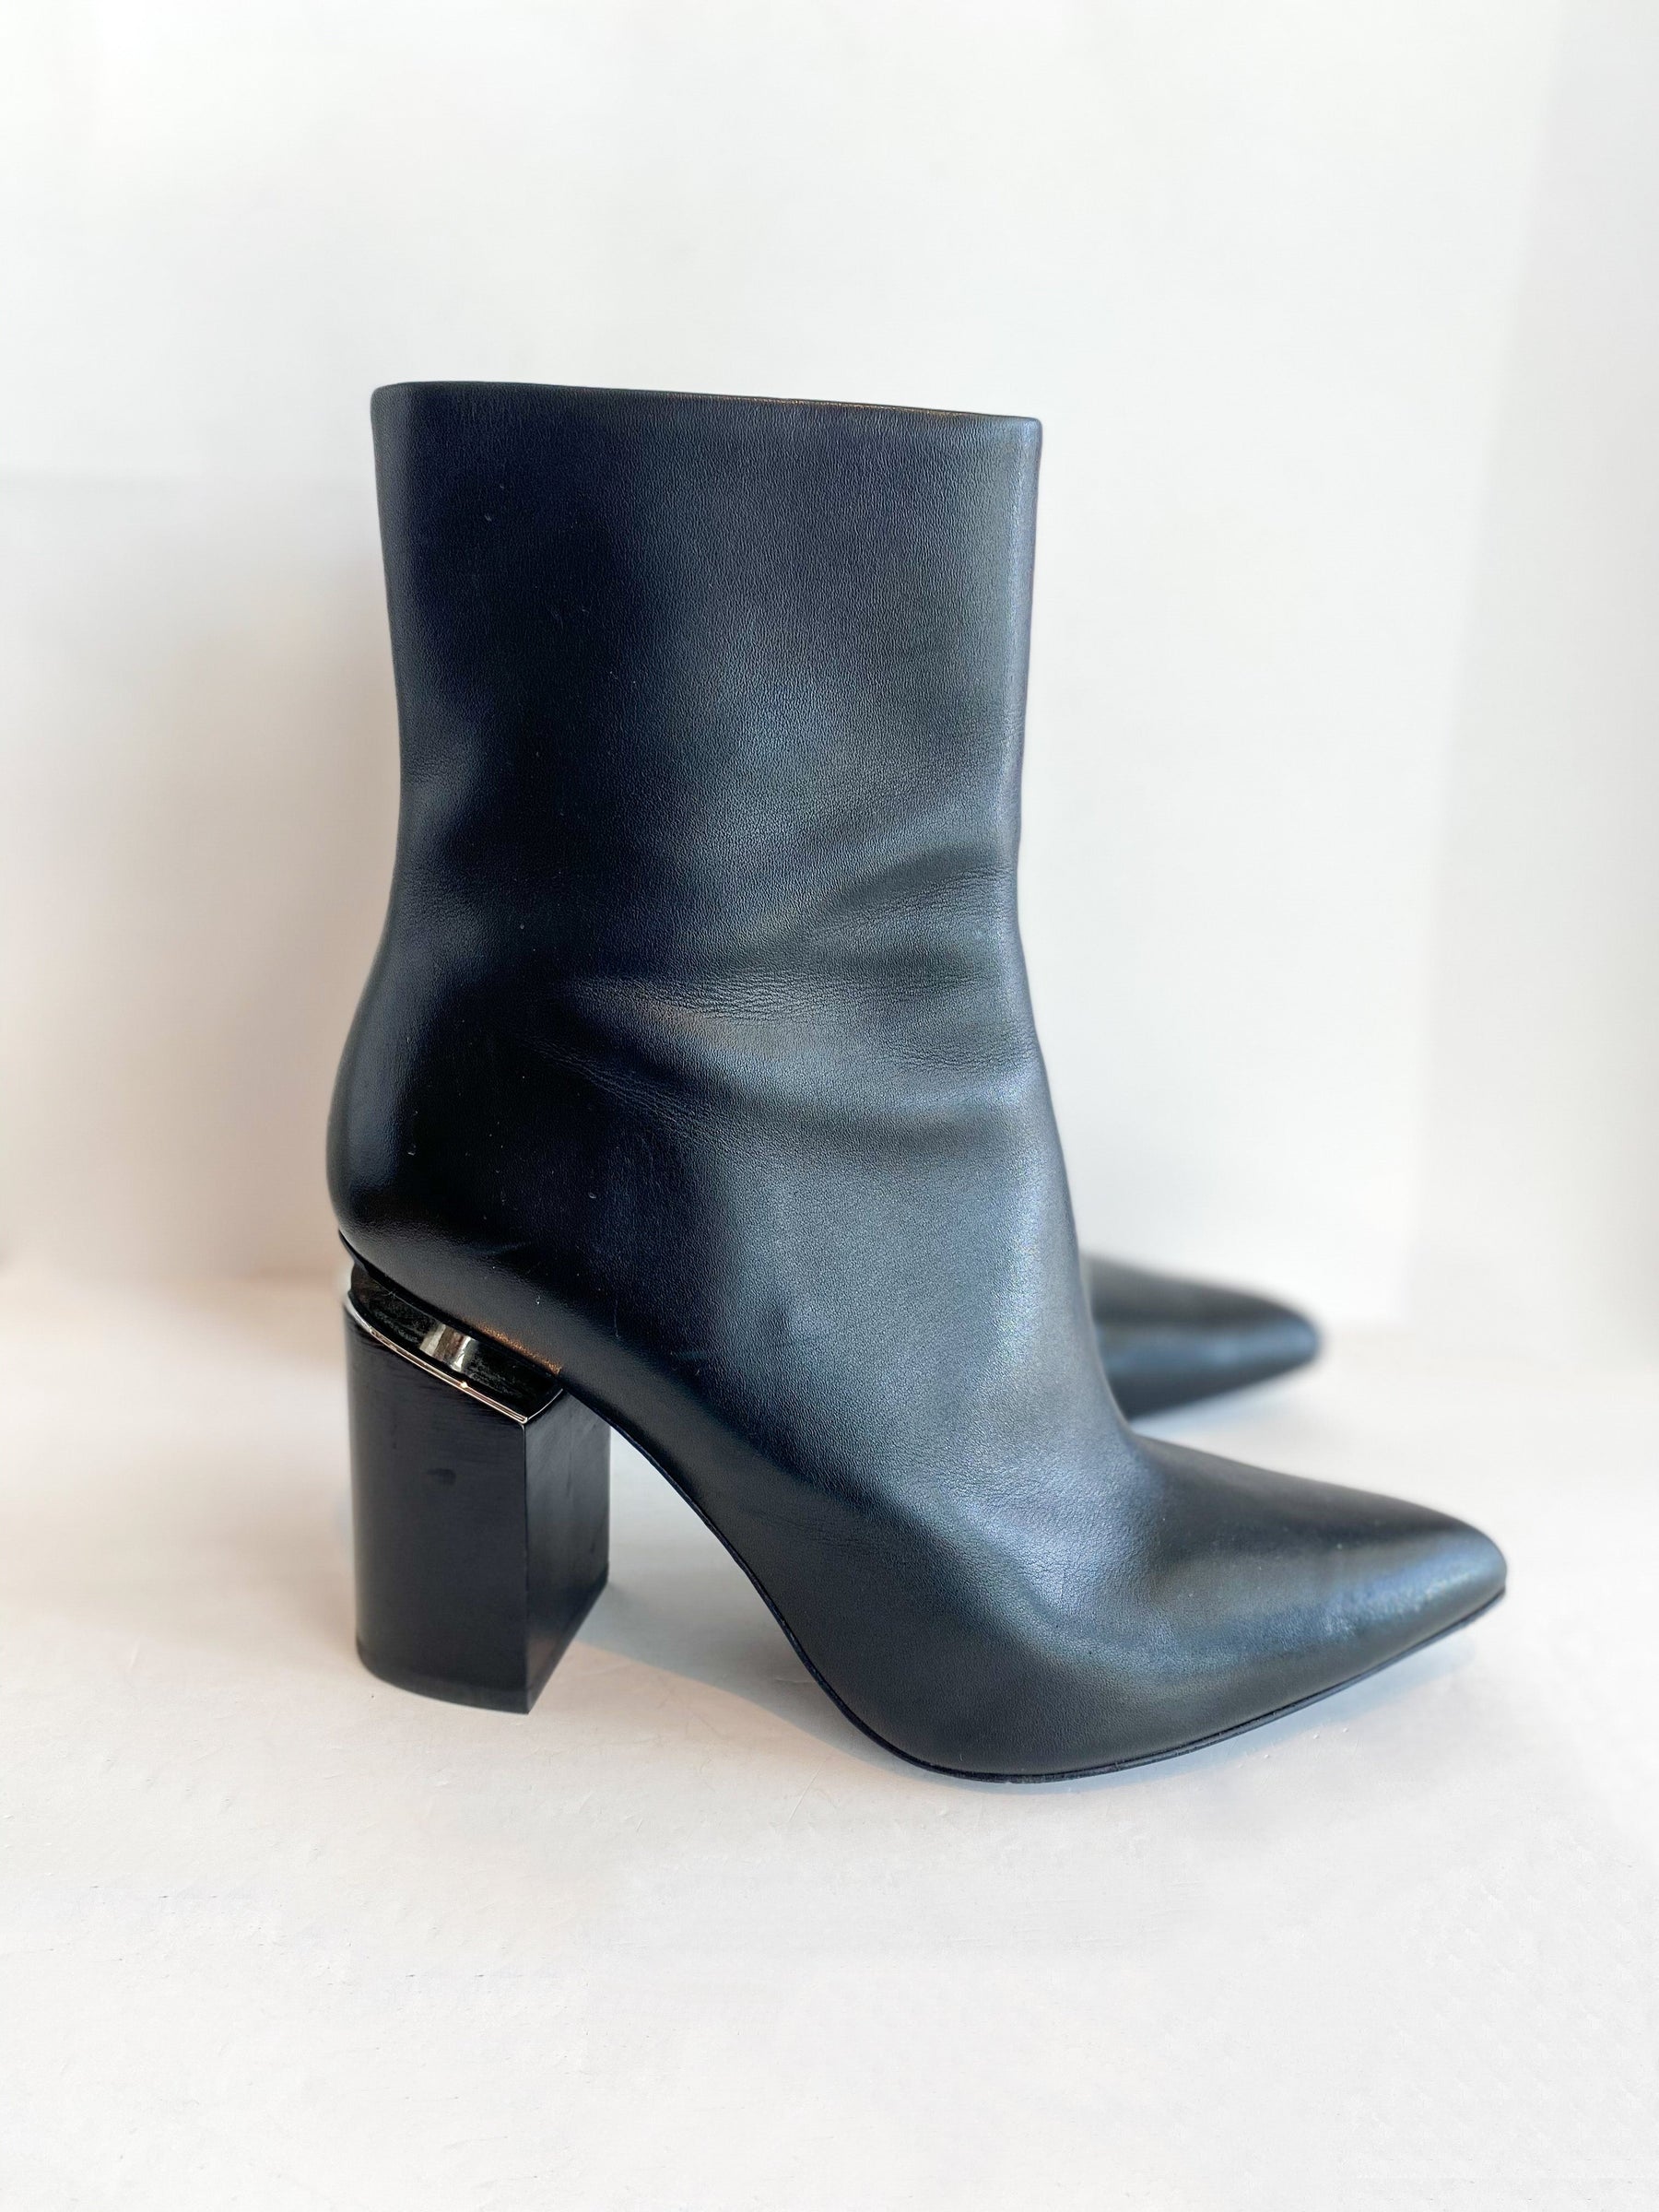 Alexander Wang Leather Boots Black Side